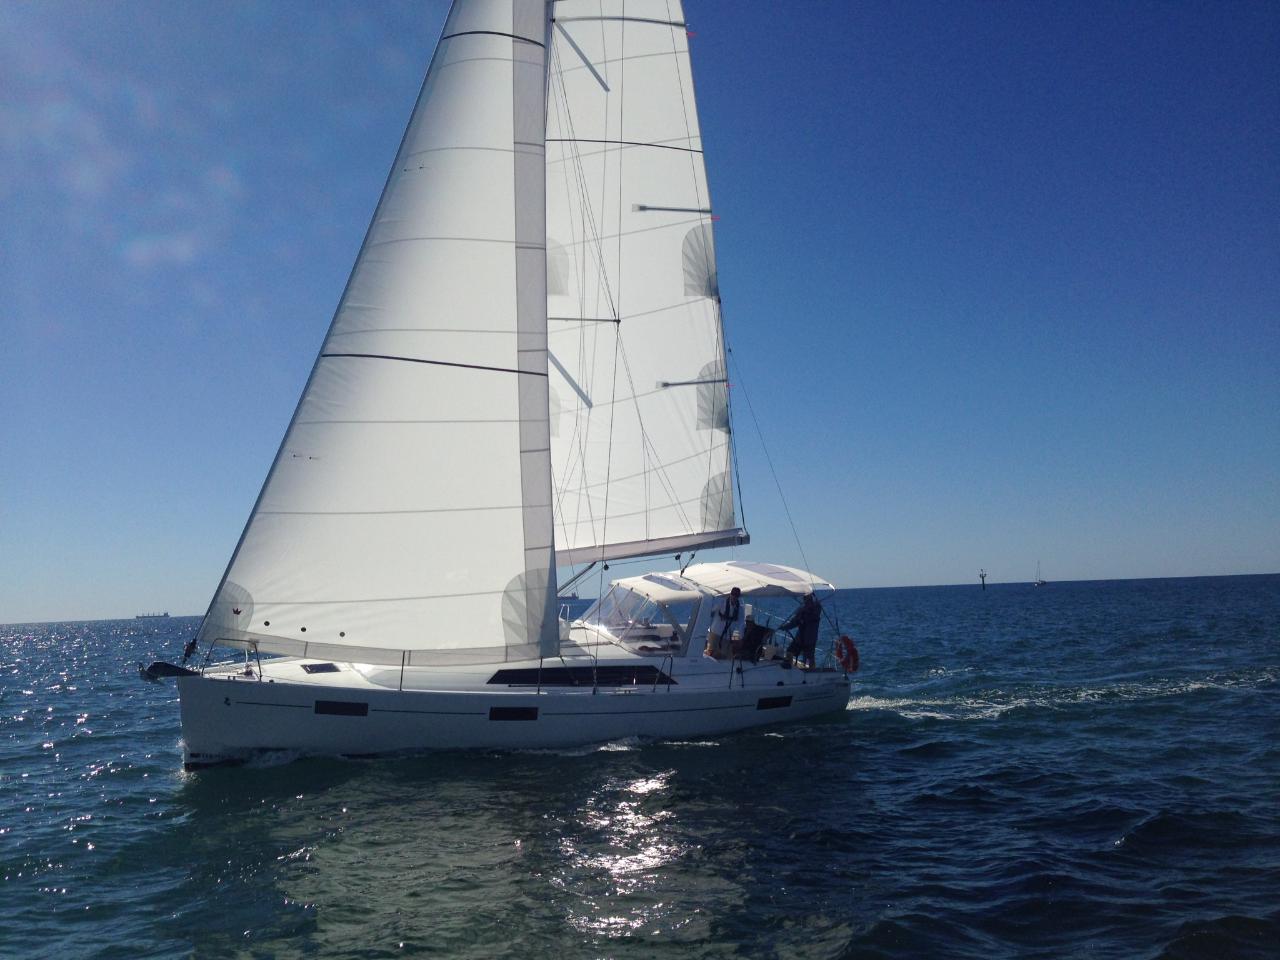 Exmouth to Busselton adventure sail - 27th Aug - 9th Sept 2022 